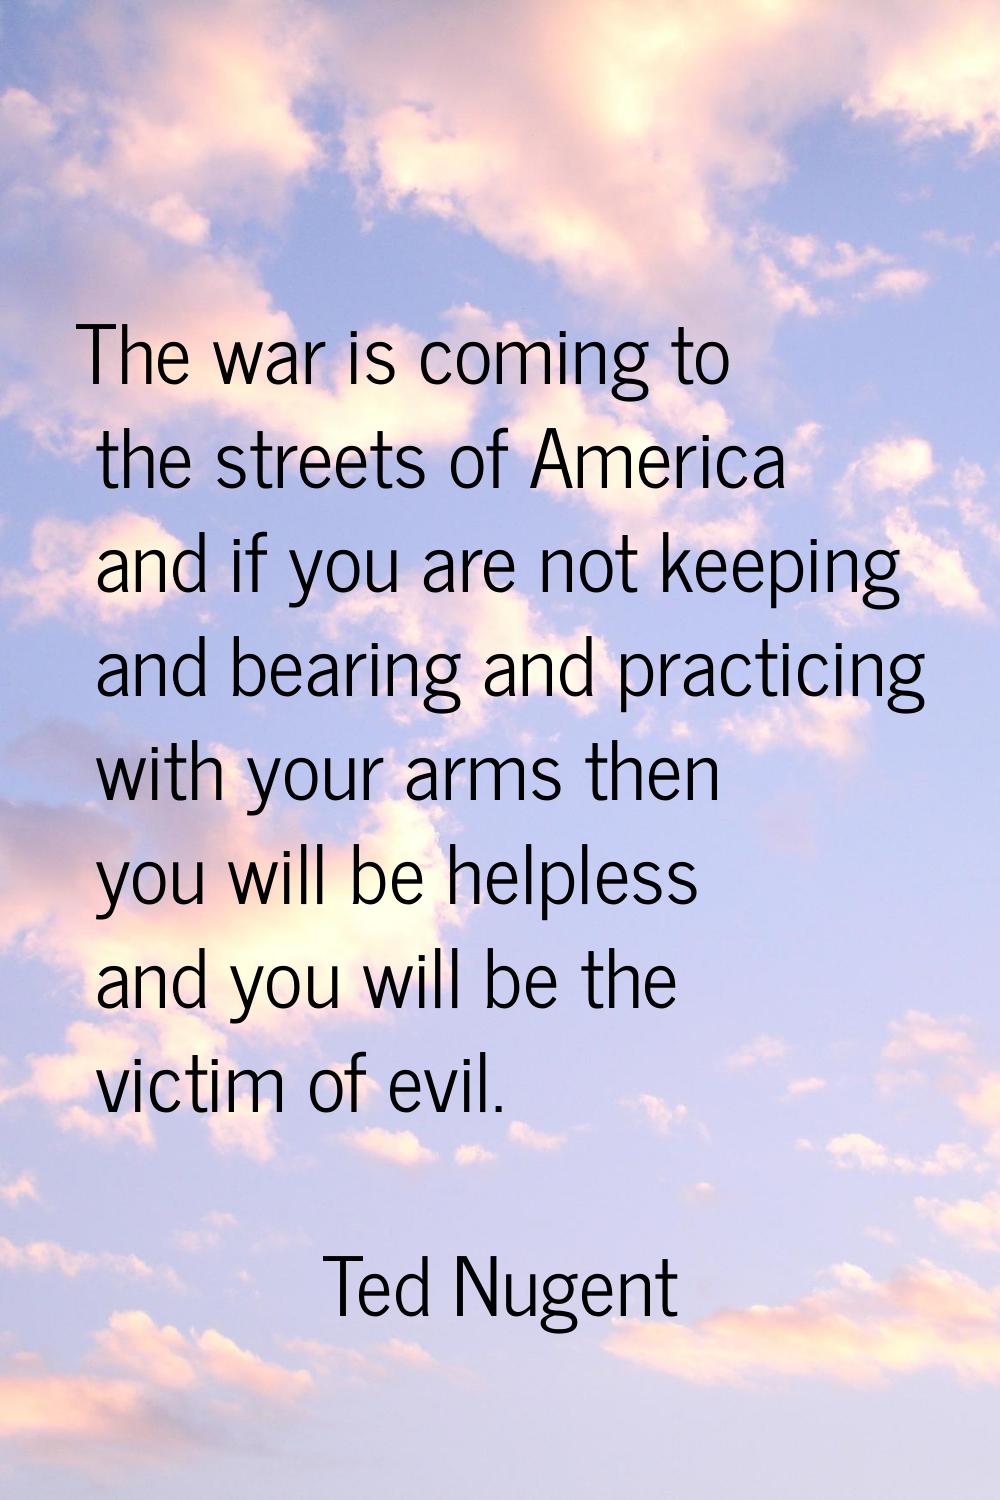 The war is coming to the streets of America and if you are not keeping and bearing and practicing w